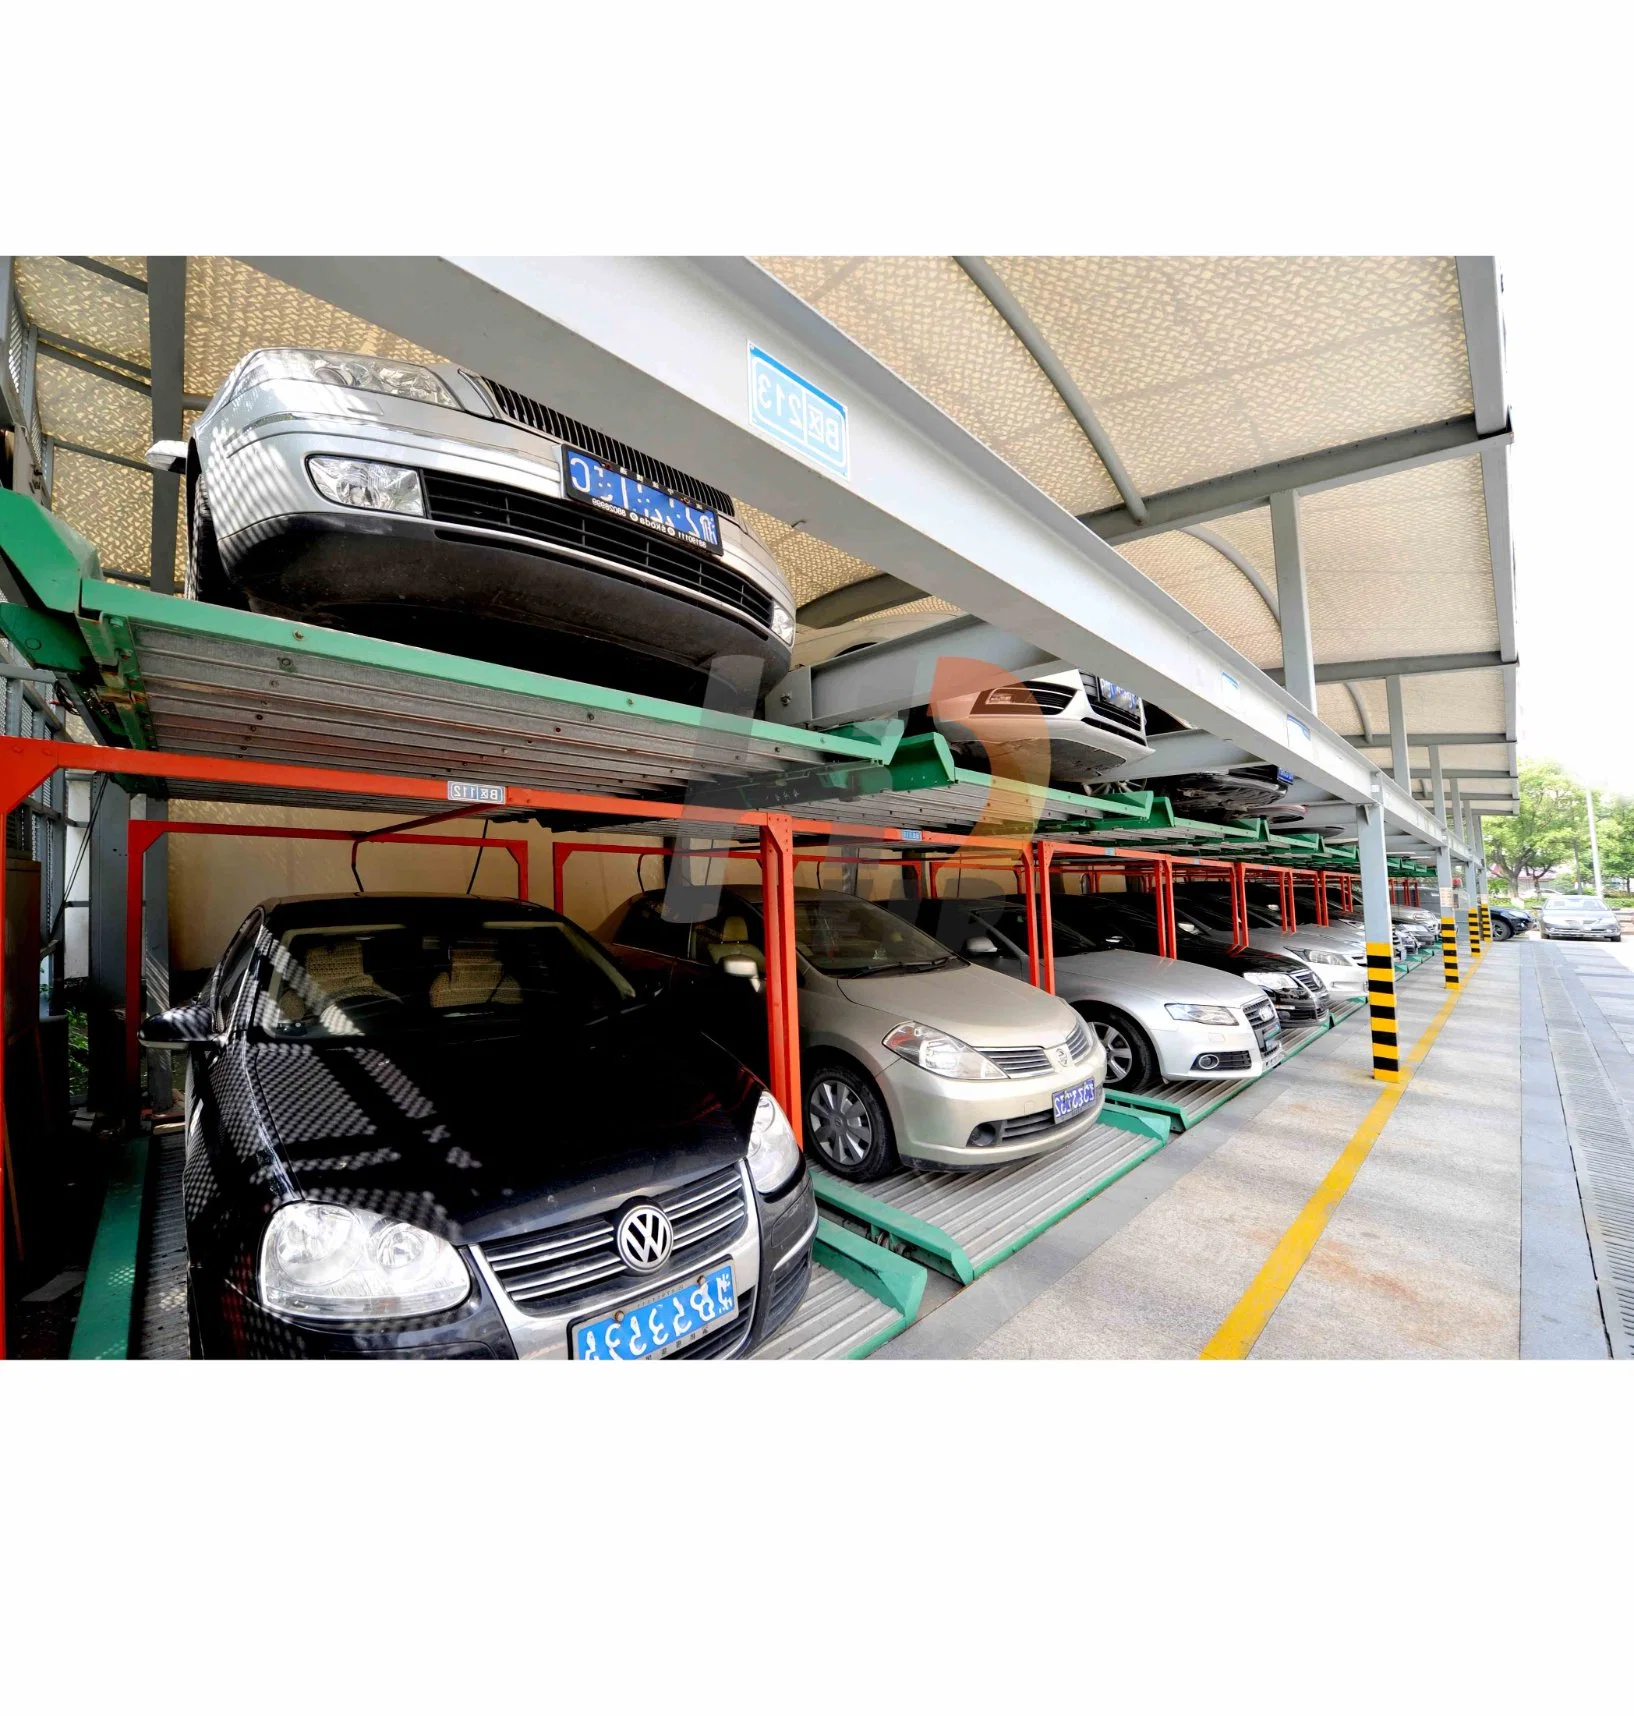 Double-Layer Puzzle Mechanical Safety Parking Lot System and Parking Solution Equipment Puzzle Mechanical Car Parking System and Vehicle Storage Parking Lot